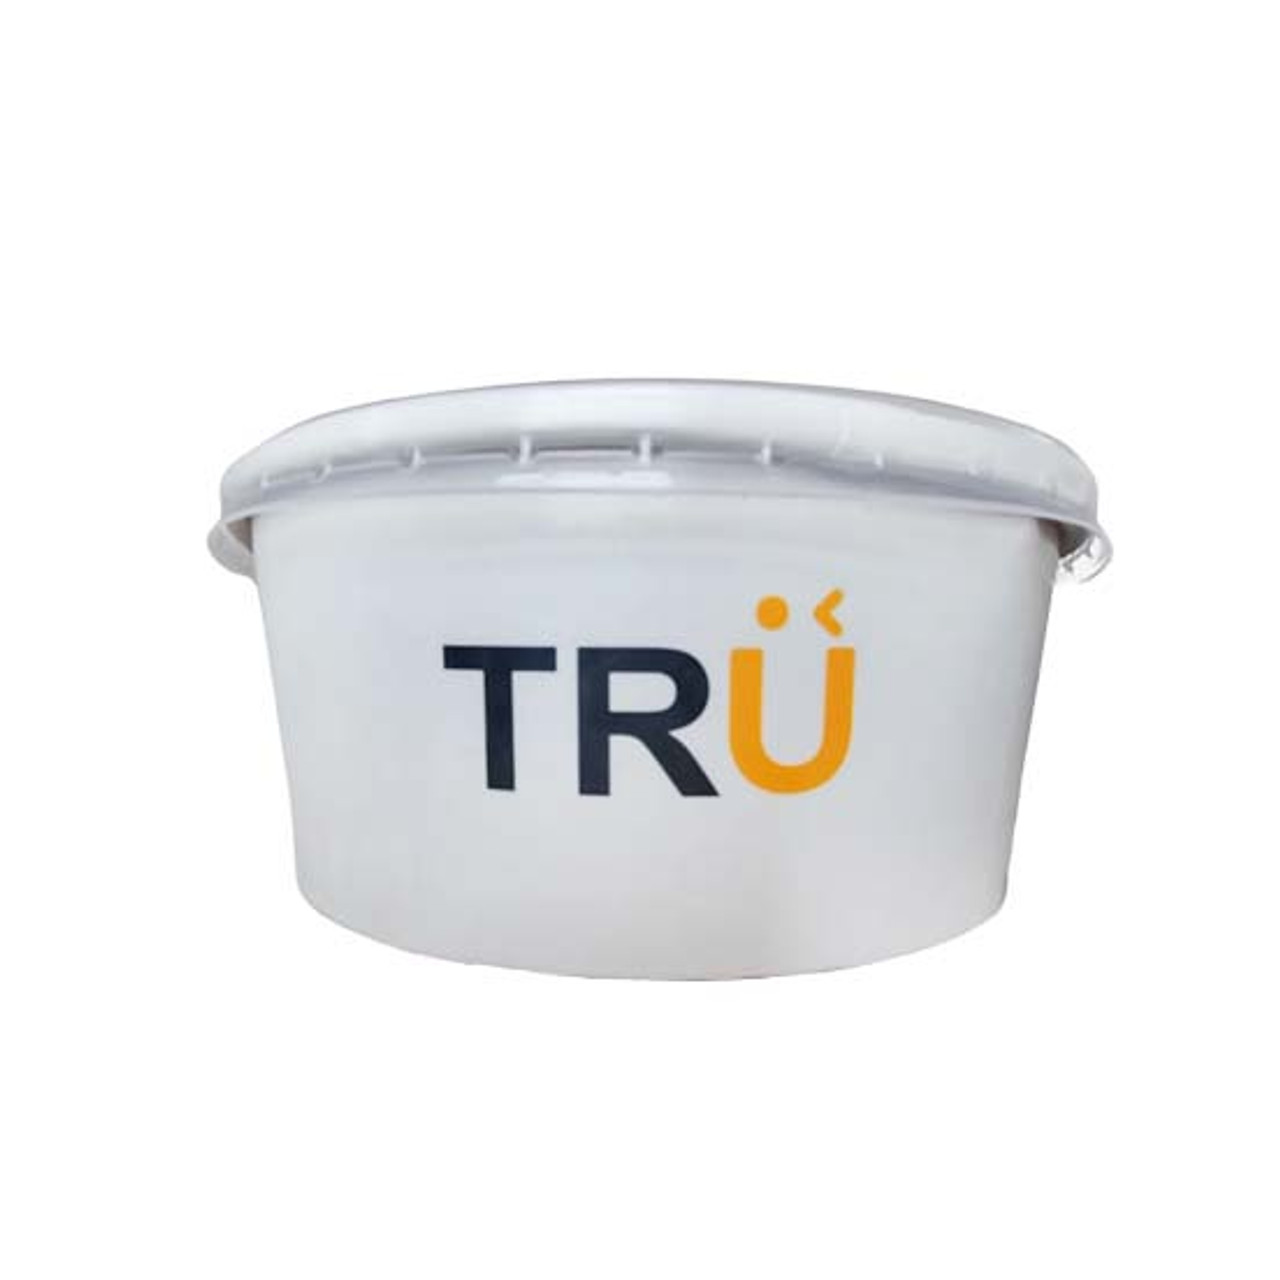 Printed  TRU 750ml White Food Tubs with 100% Clear Recyclable Lid up to 50% off Kraft Prices